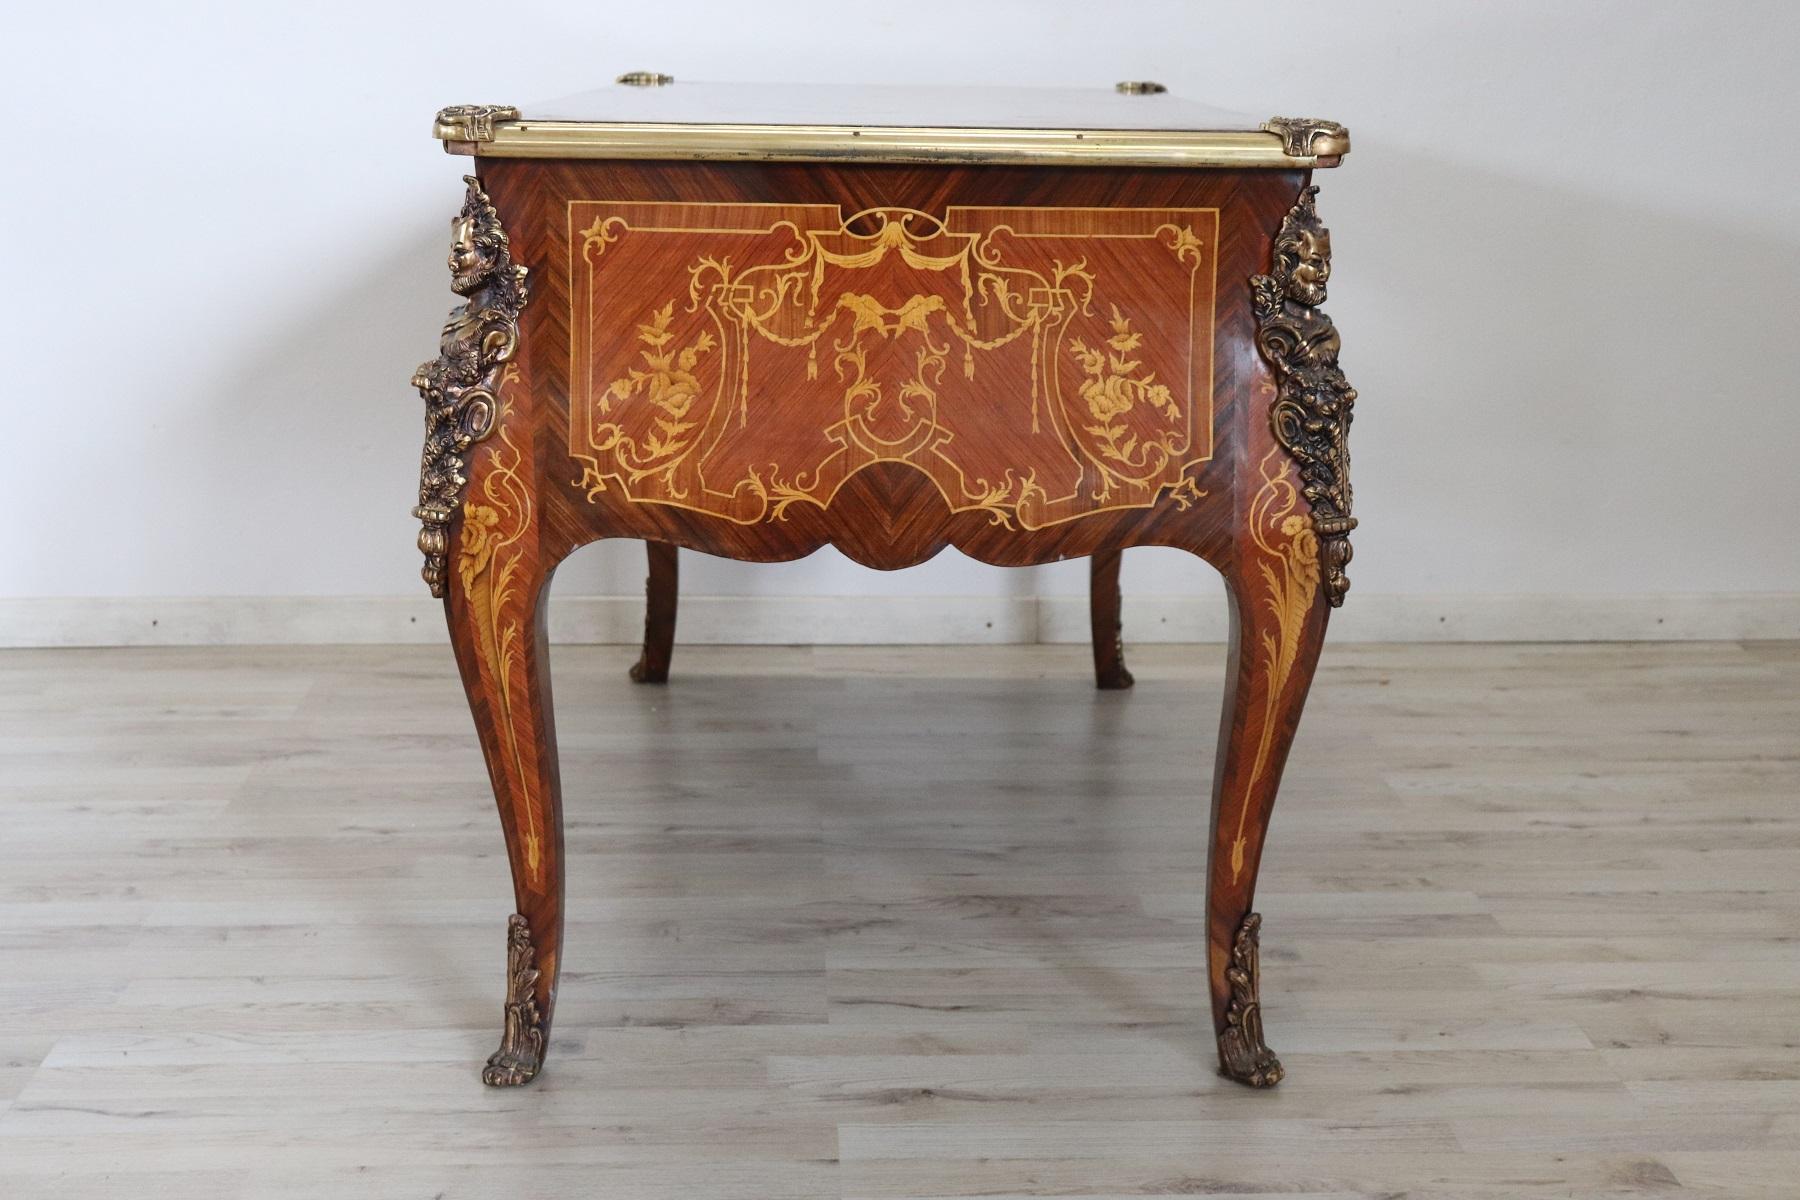 20th Century French Louis XV Style Wood Inlay Golden Bronzes Desk, Writing Table 2